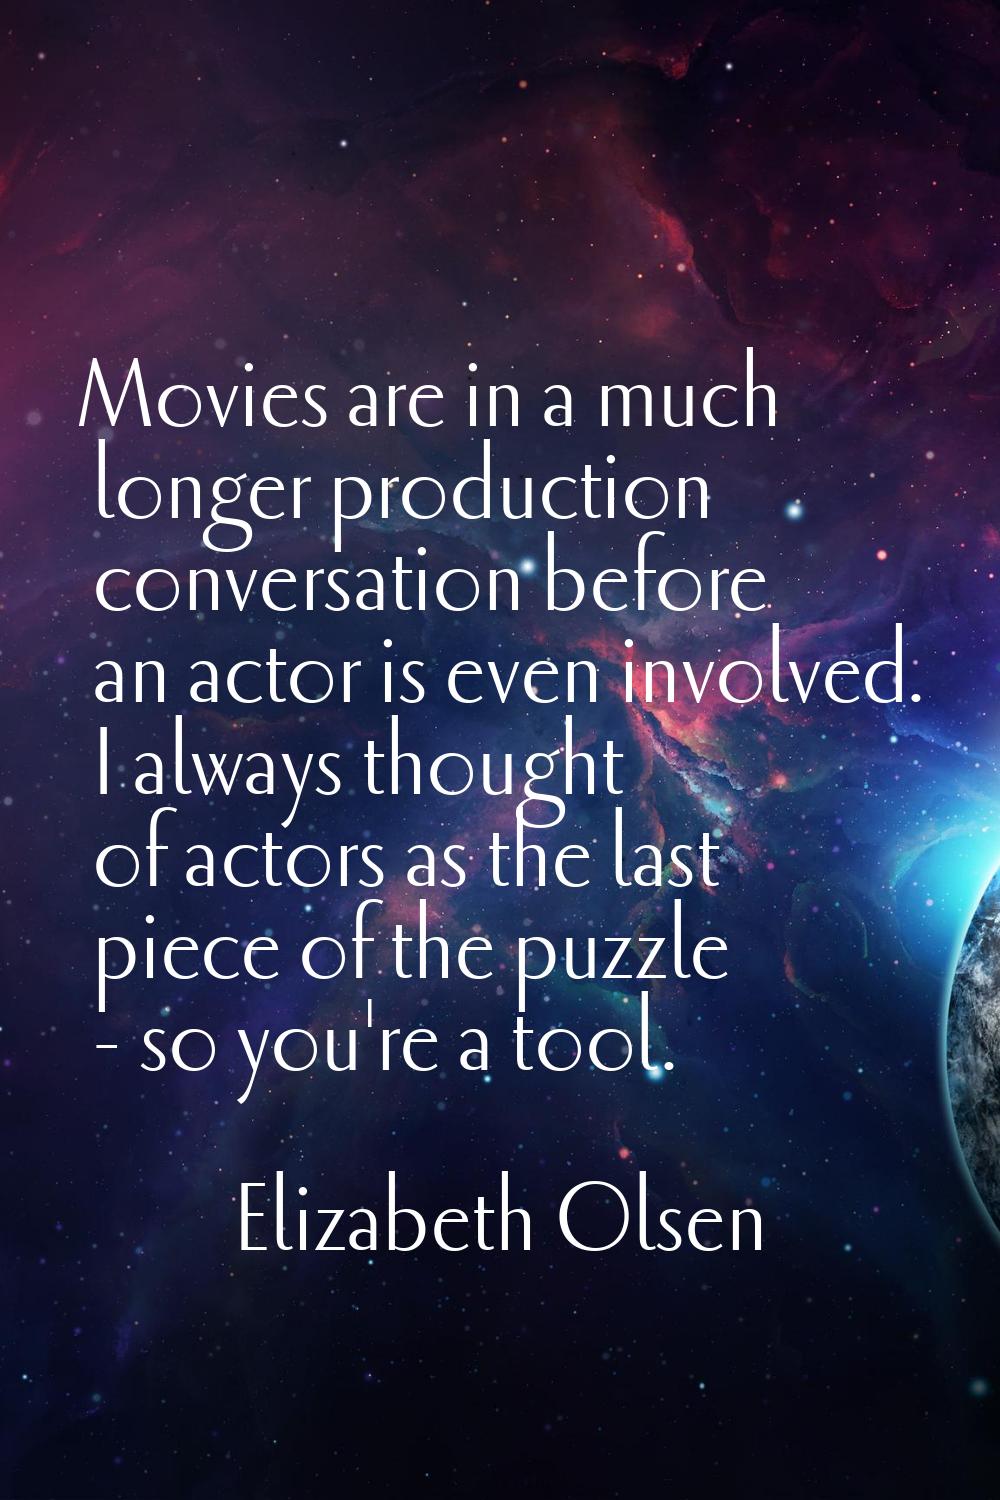 Movies are in a much longer production conversation before an actor is even involved. I always thou